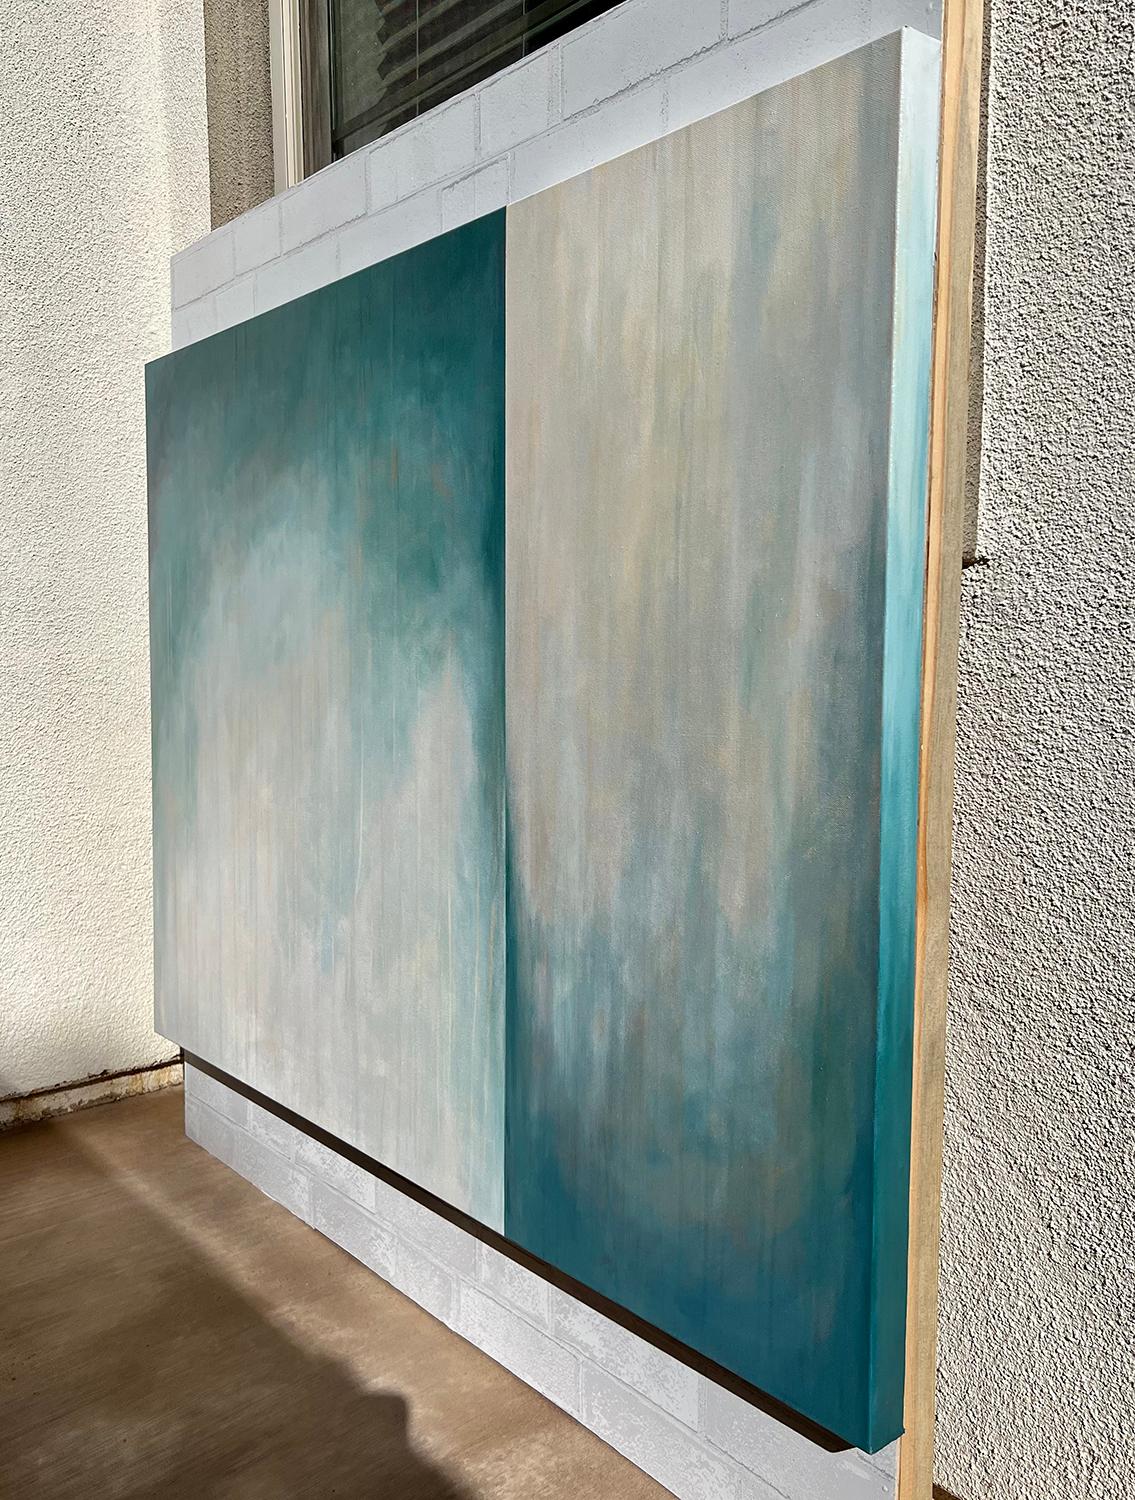 <p>Artist Comments<br>Inspired by Rothko and color field painting, artist Marie-Eve Champagne explores the captivating power of color modulations. Marie-Eve plays with an extended notion of gradience and its contrasts. The soft textures obtained